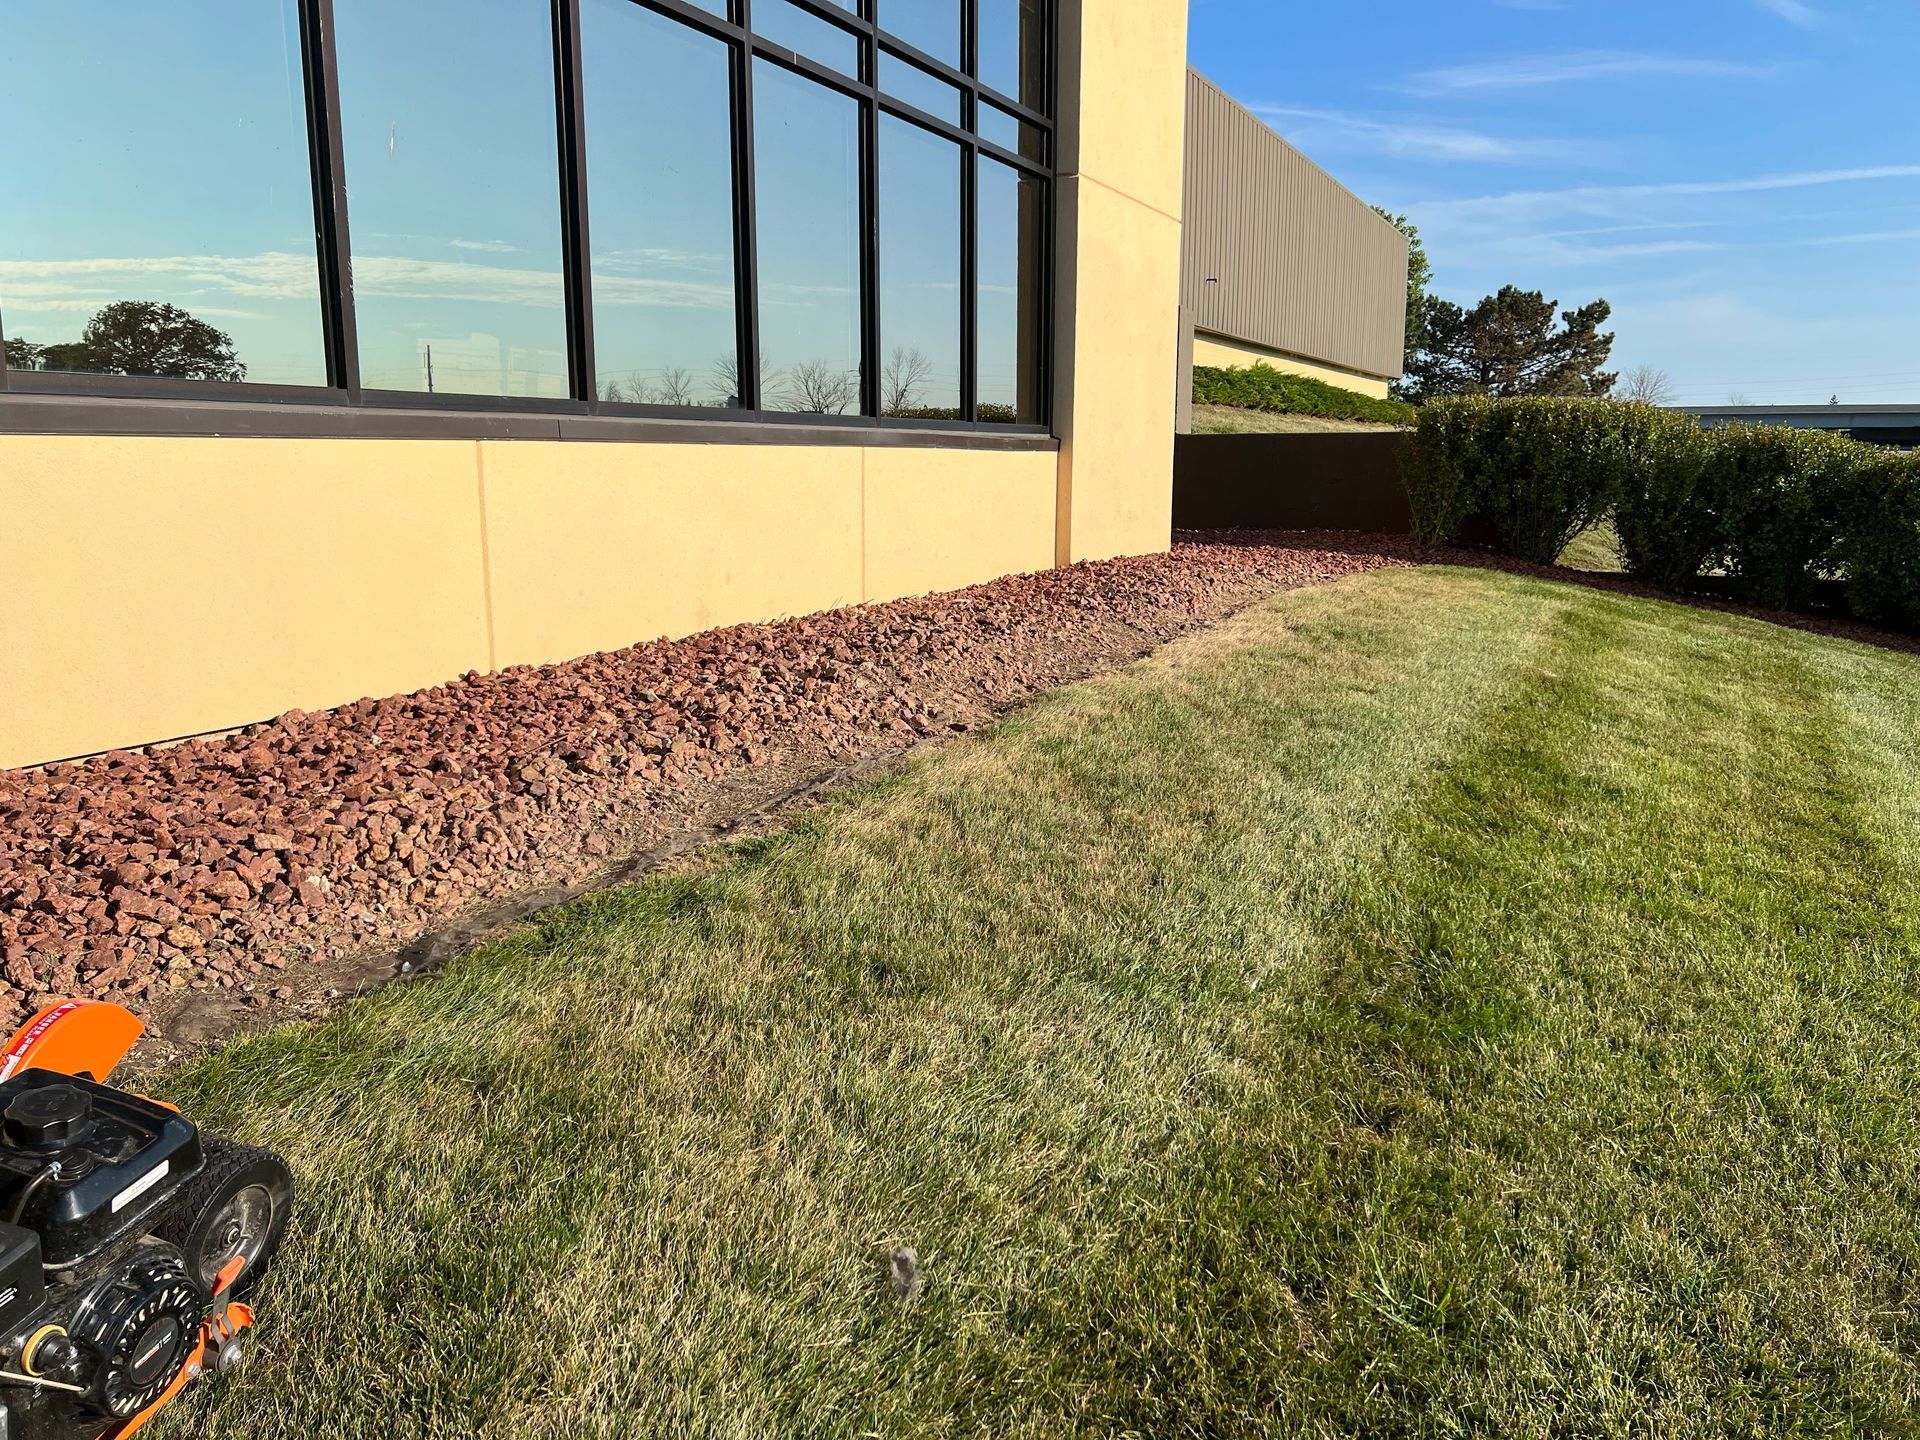 A commercial landscape project in Fond du Lac, WI